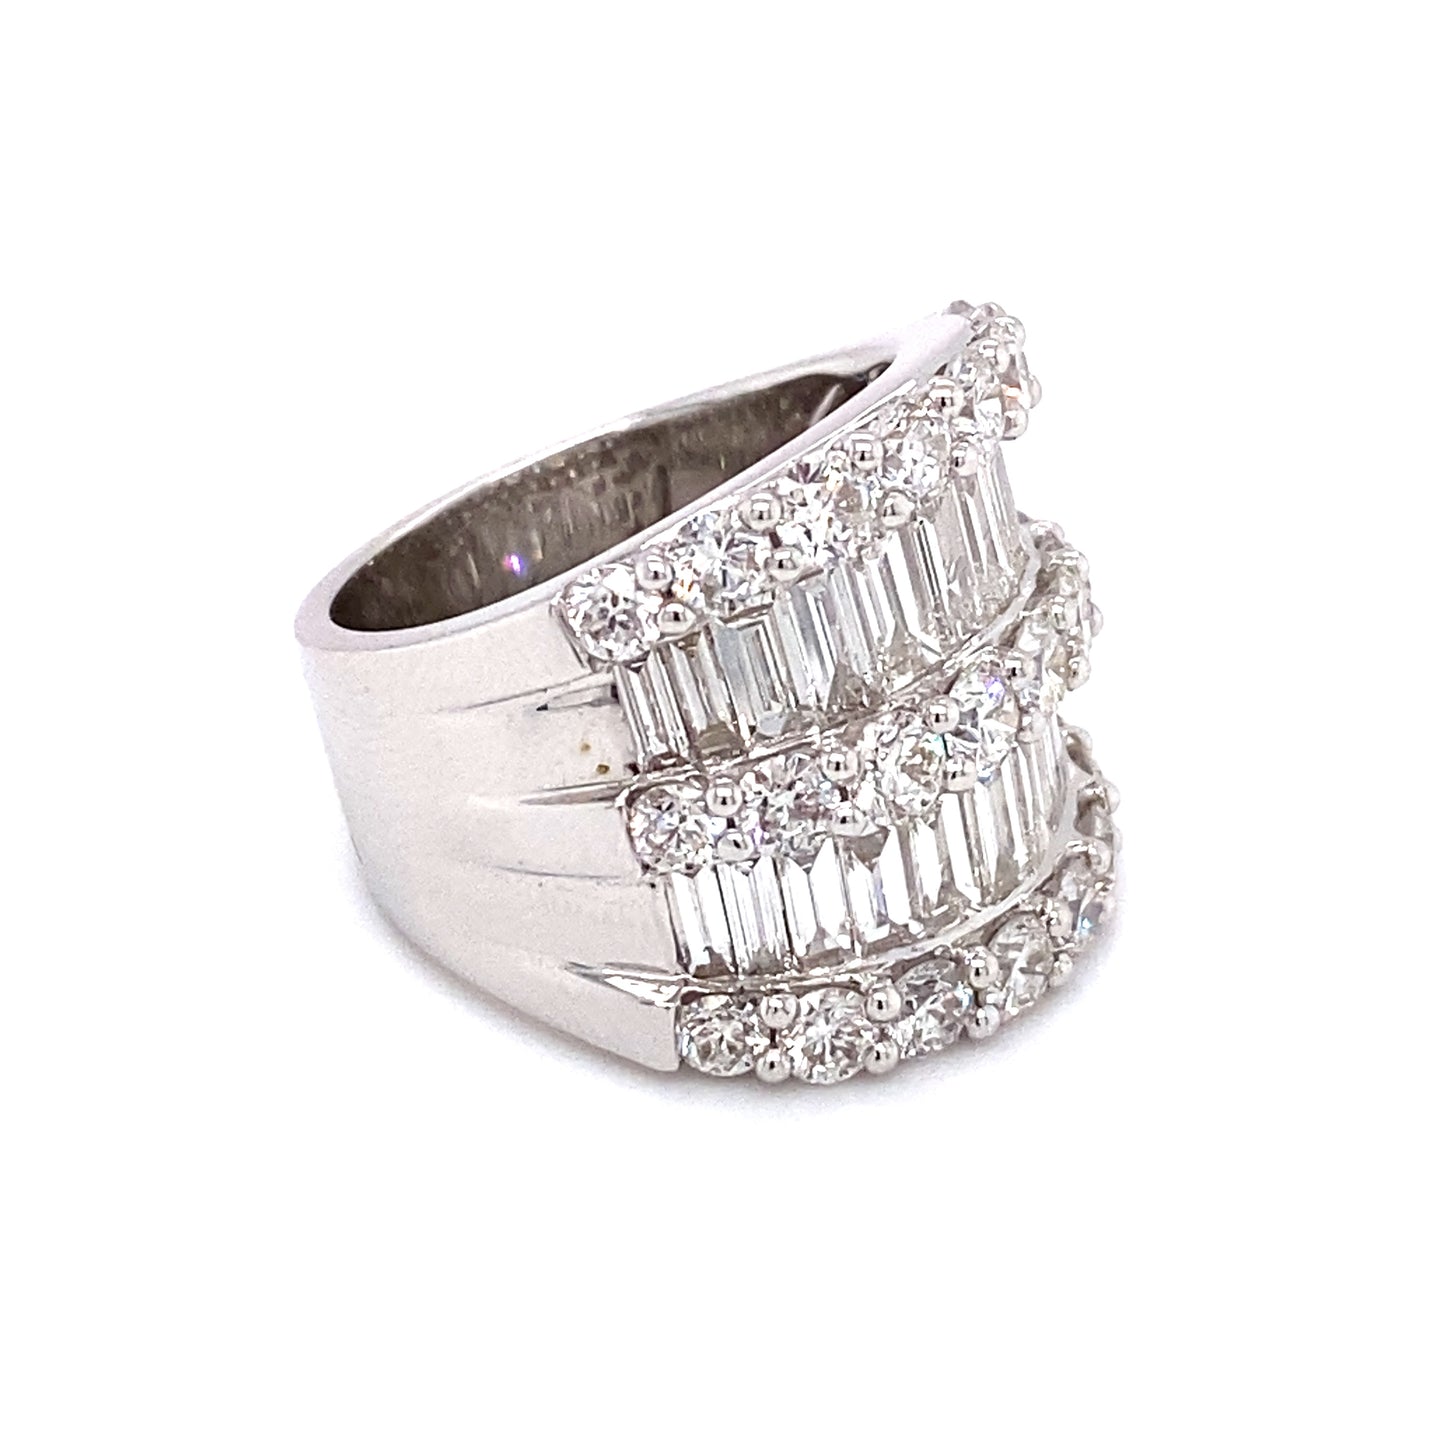 Circa 1980s 4.8 Carat Round and Baguette Diamond Band in 18K White Gold